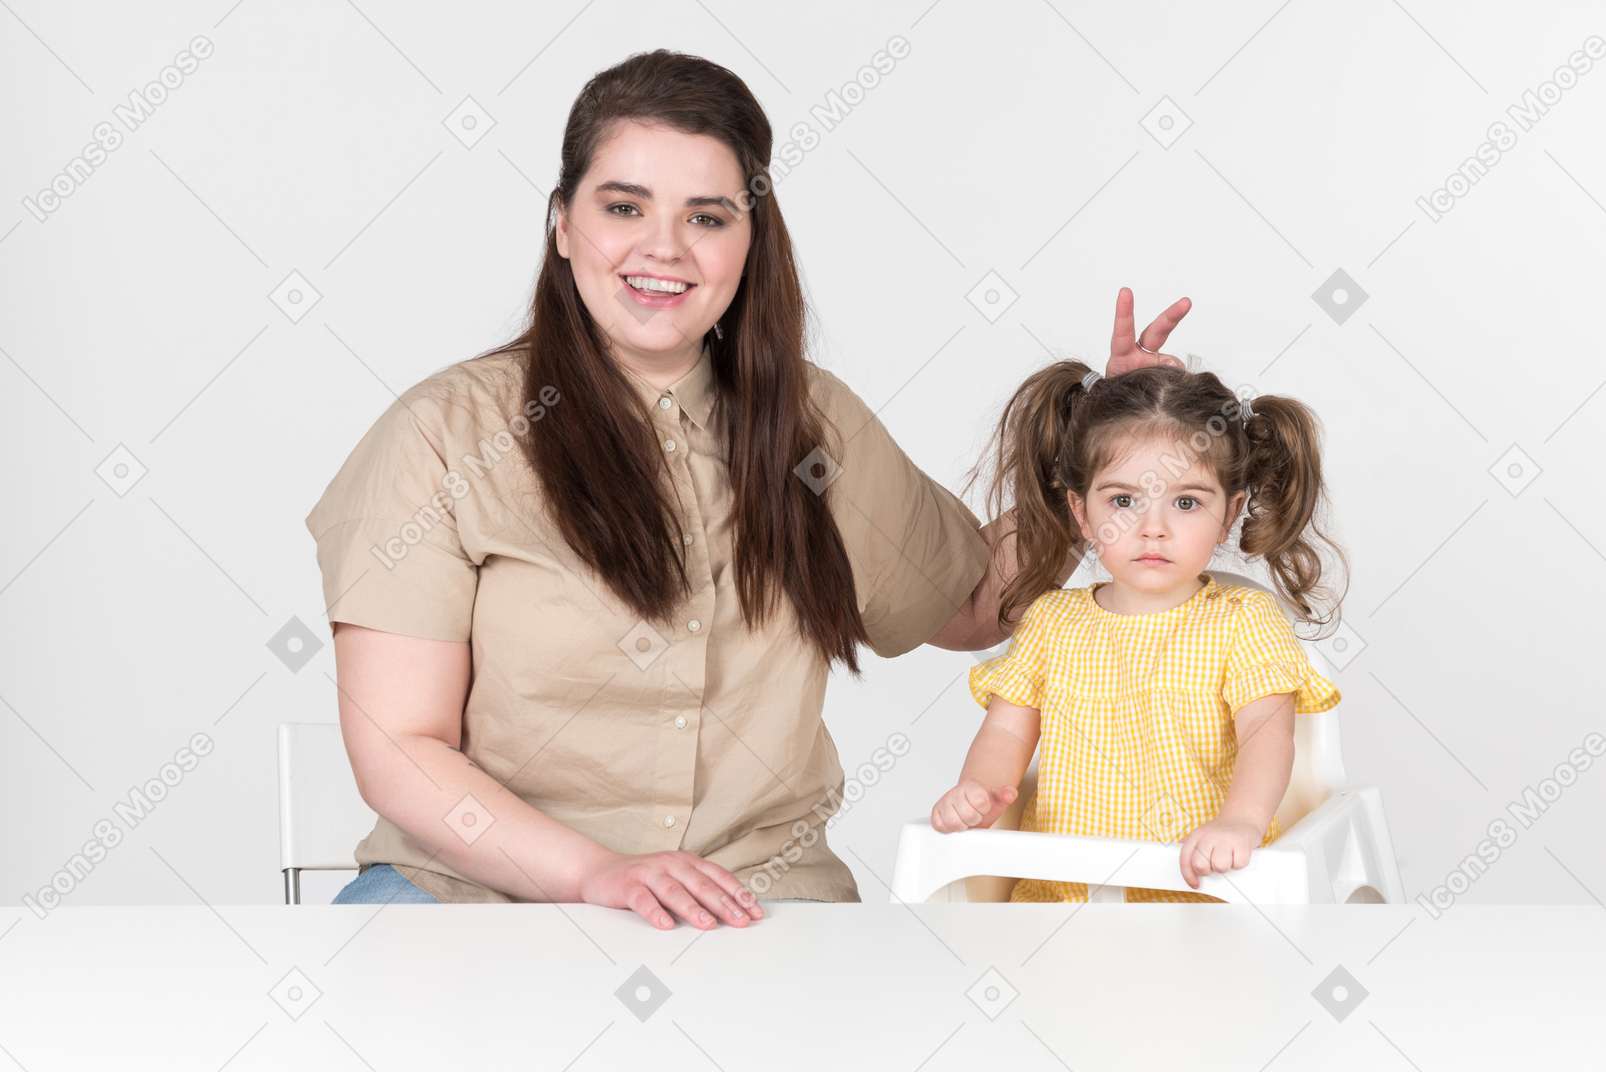 Mom and daughter sitting at the table and mom doing bunny ears to her daughter